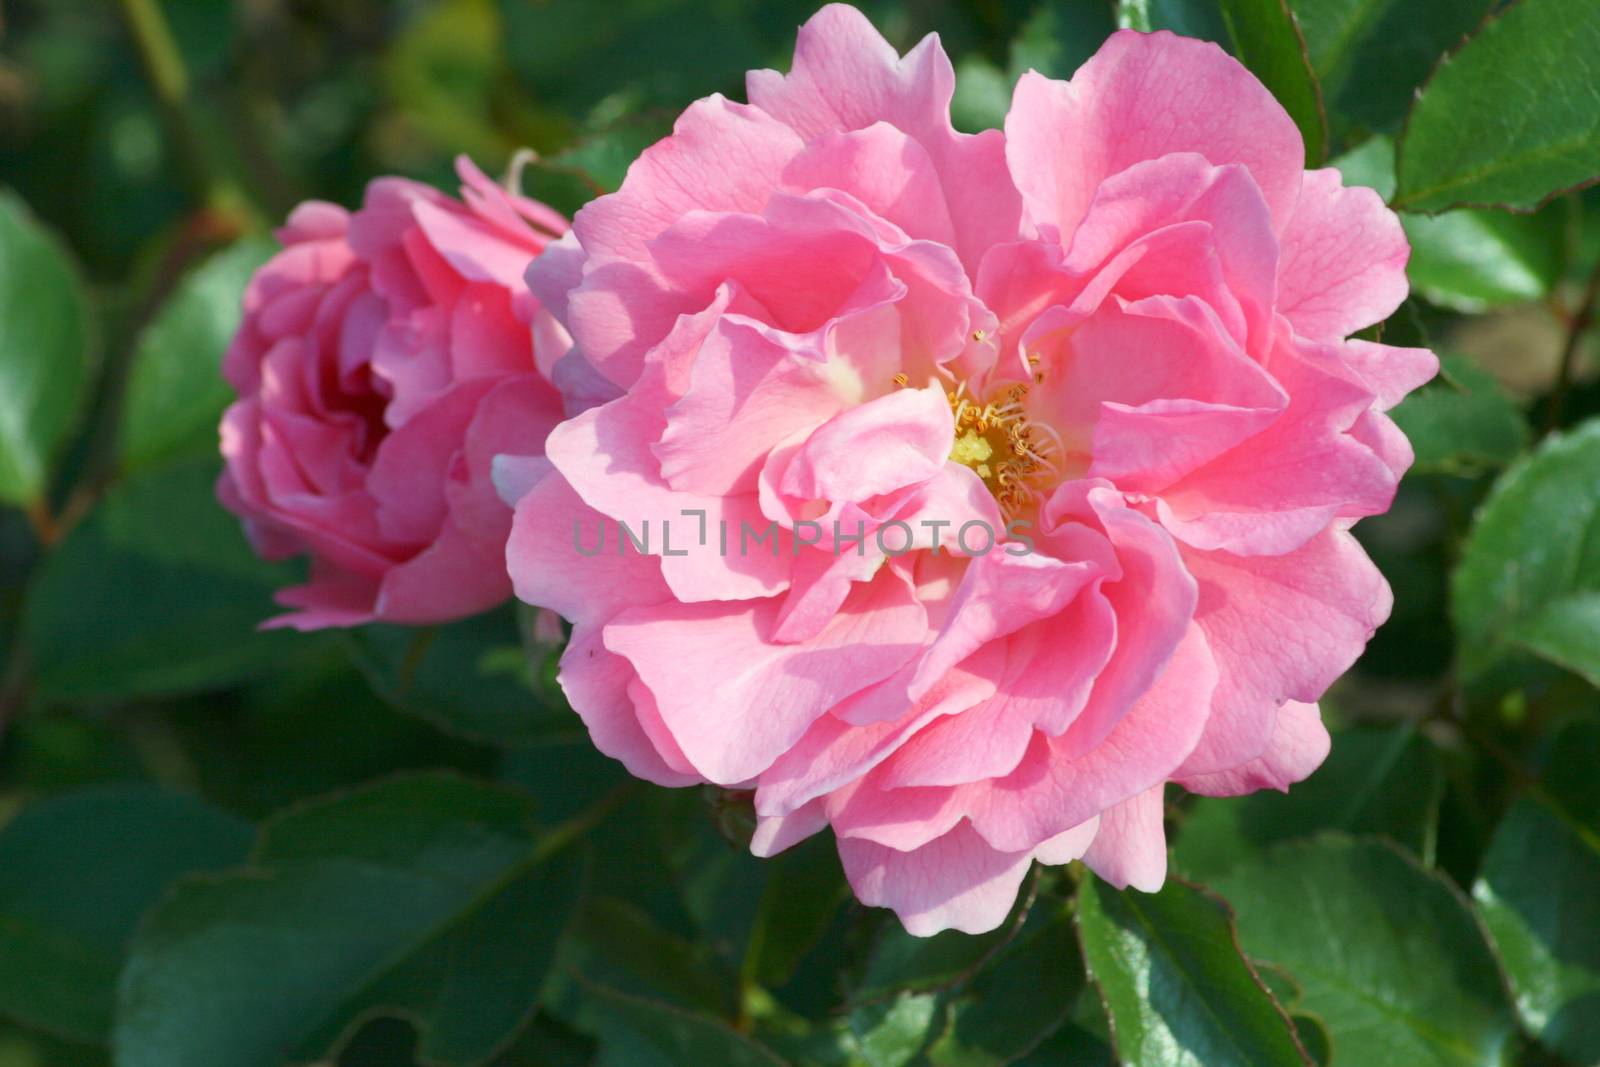 Close-up of a pink rose blossom  Nahaufnahme einer rosafarbenen Rosenbl�te by hadot